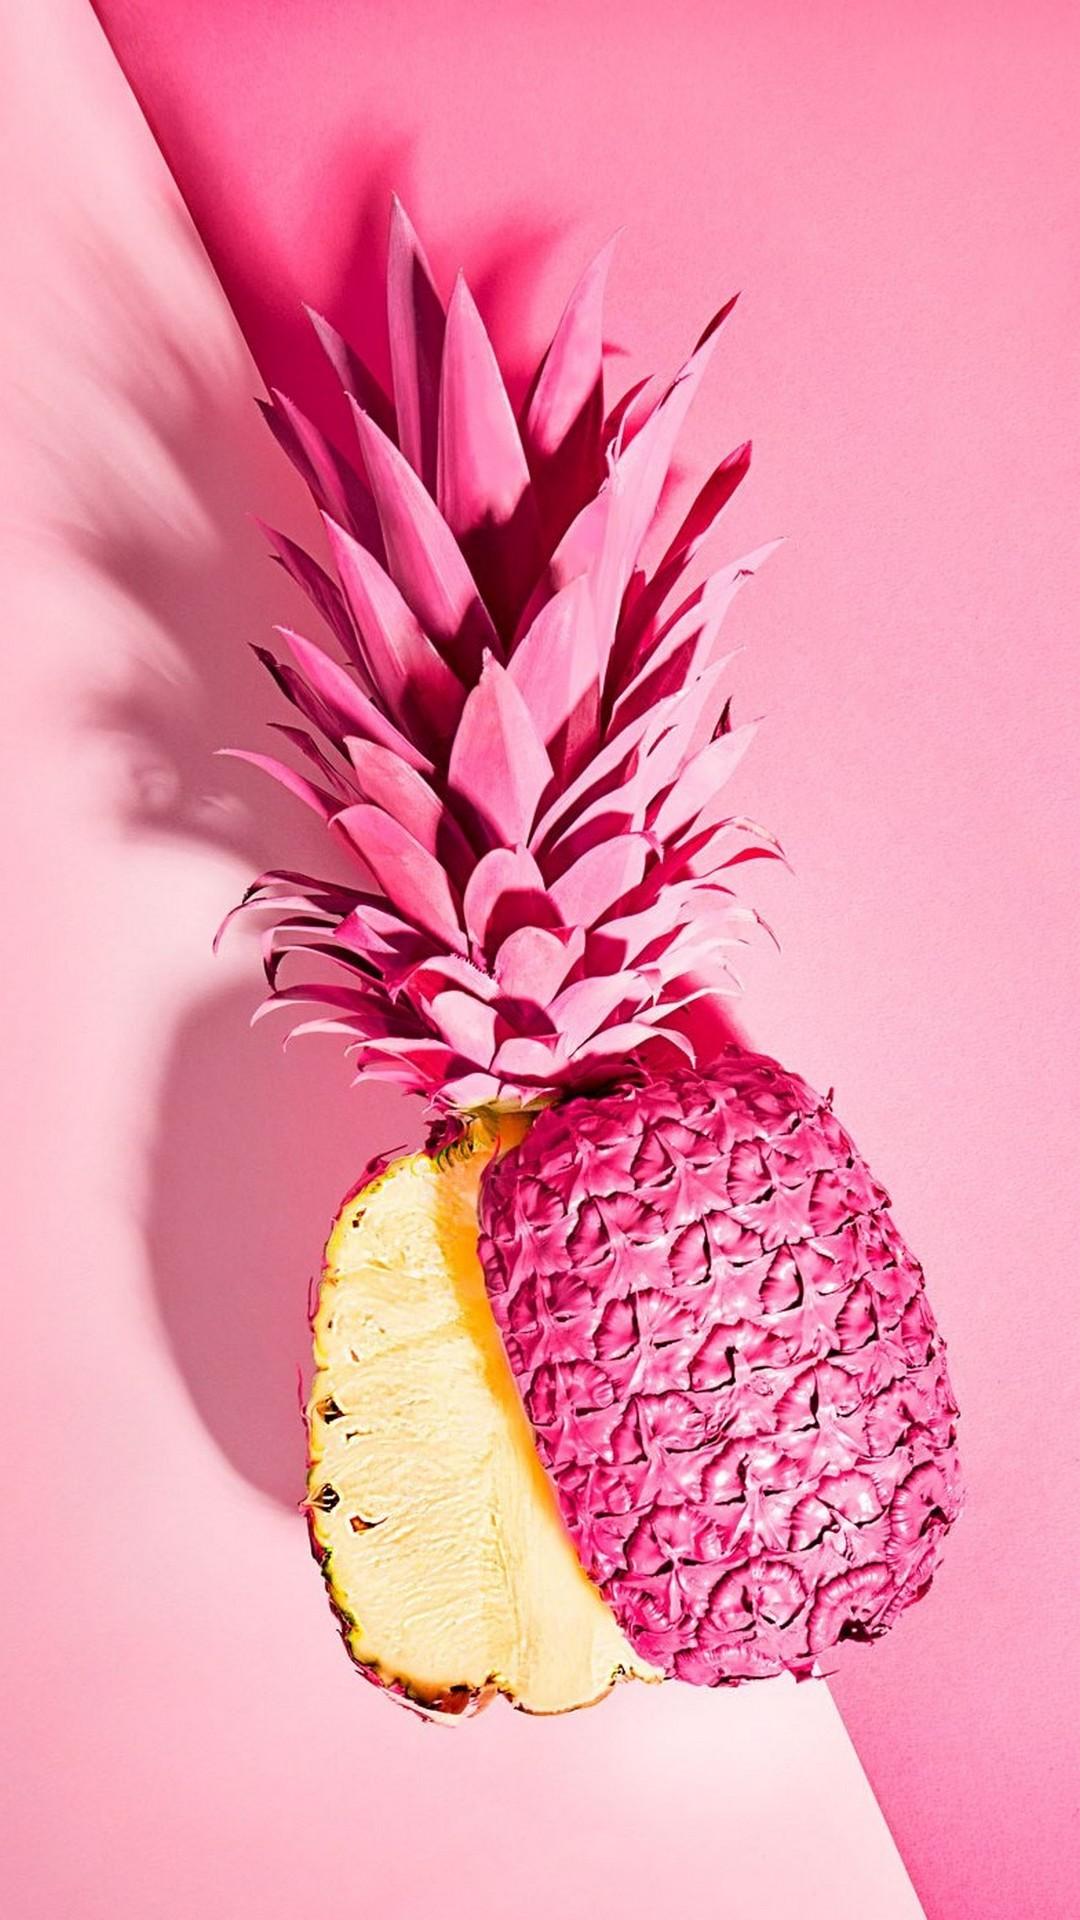 Best Pink Pineapple Wallpapers iPhone